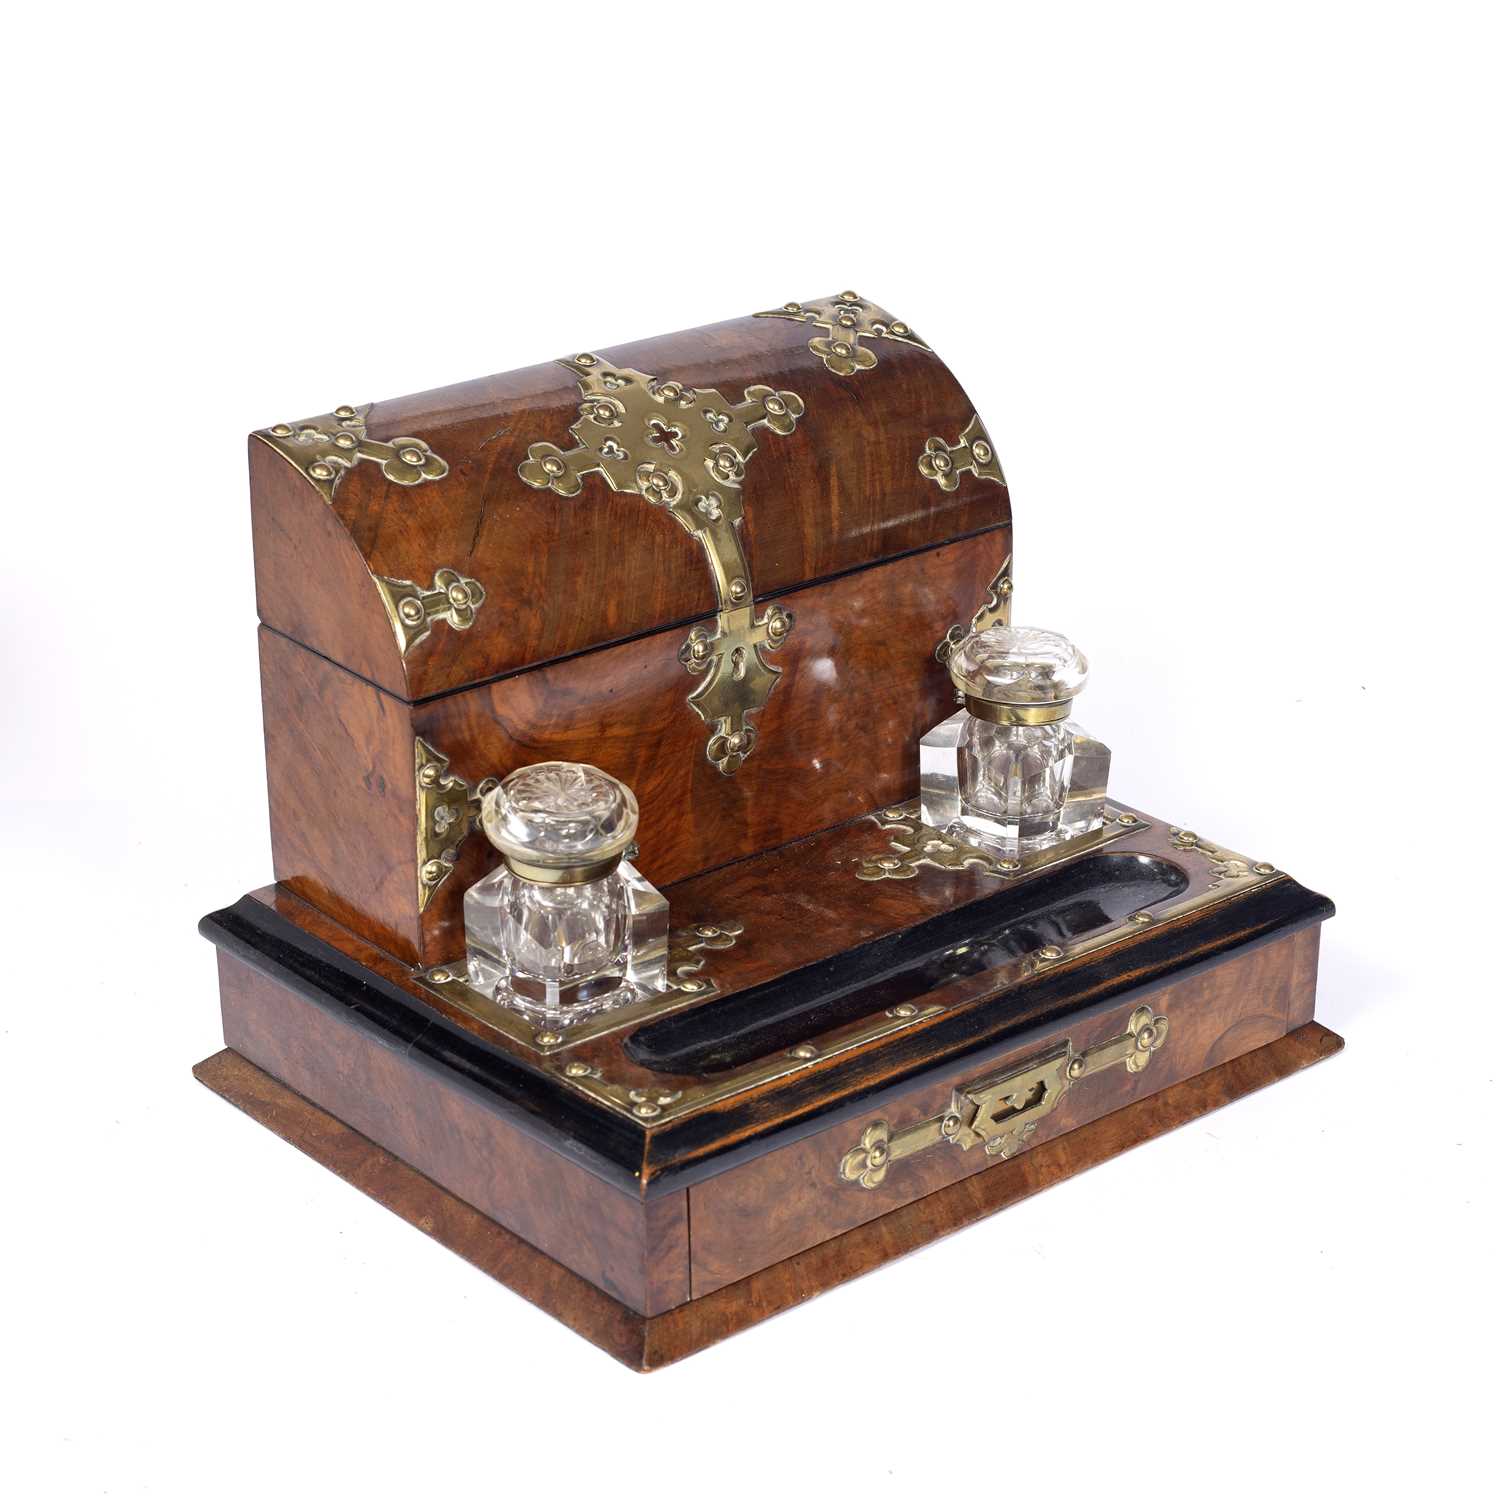 A Victorian figured walnut and brass mounted library desk stand, with correspondence box, twin glass